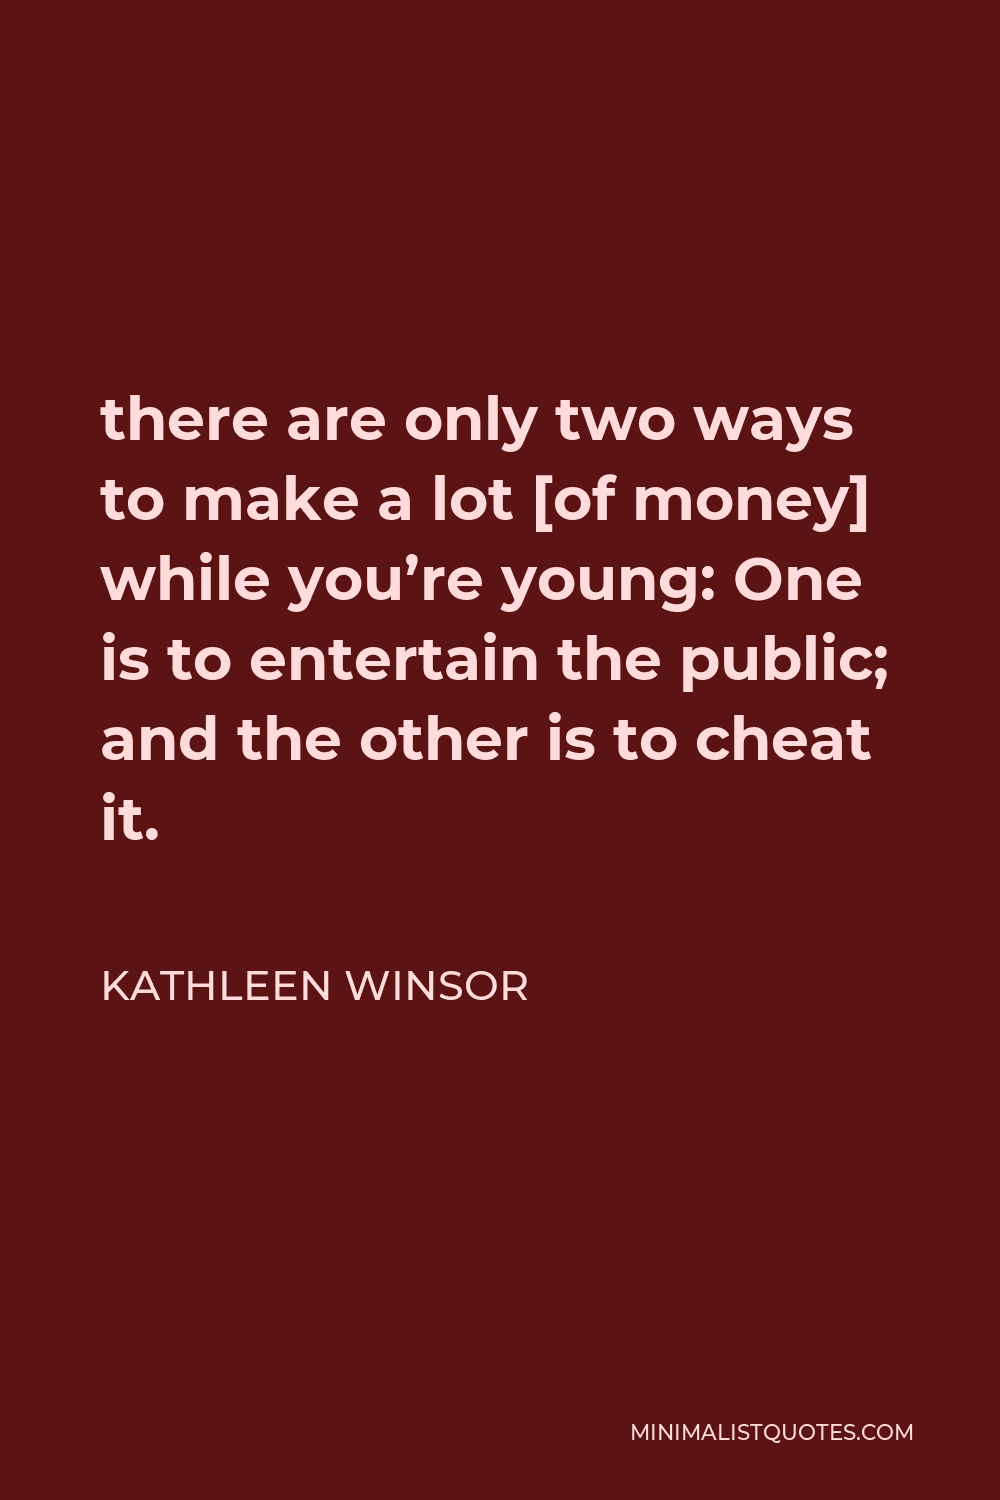 Kathleen Winsor Quote - there are only two ways to make a lot [of money] while you’re young: One is to entertain the public; and the other is to cheat it.